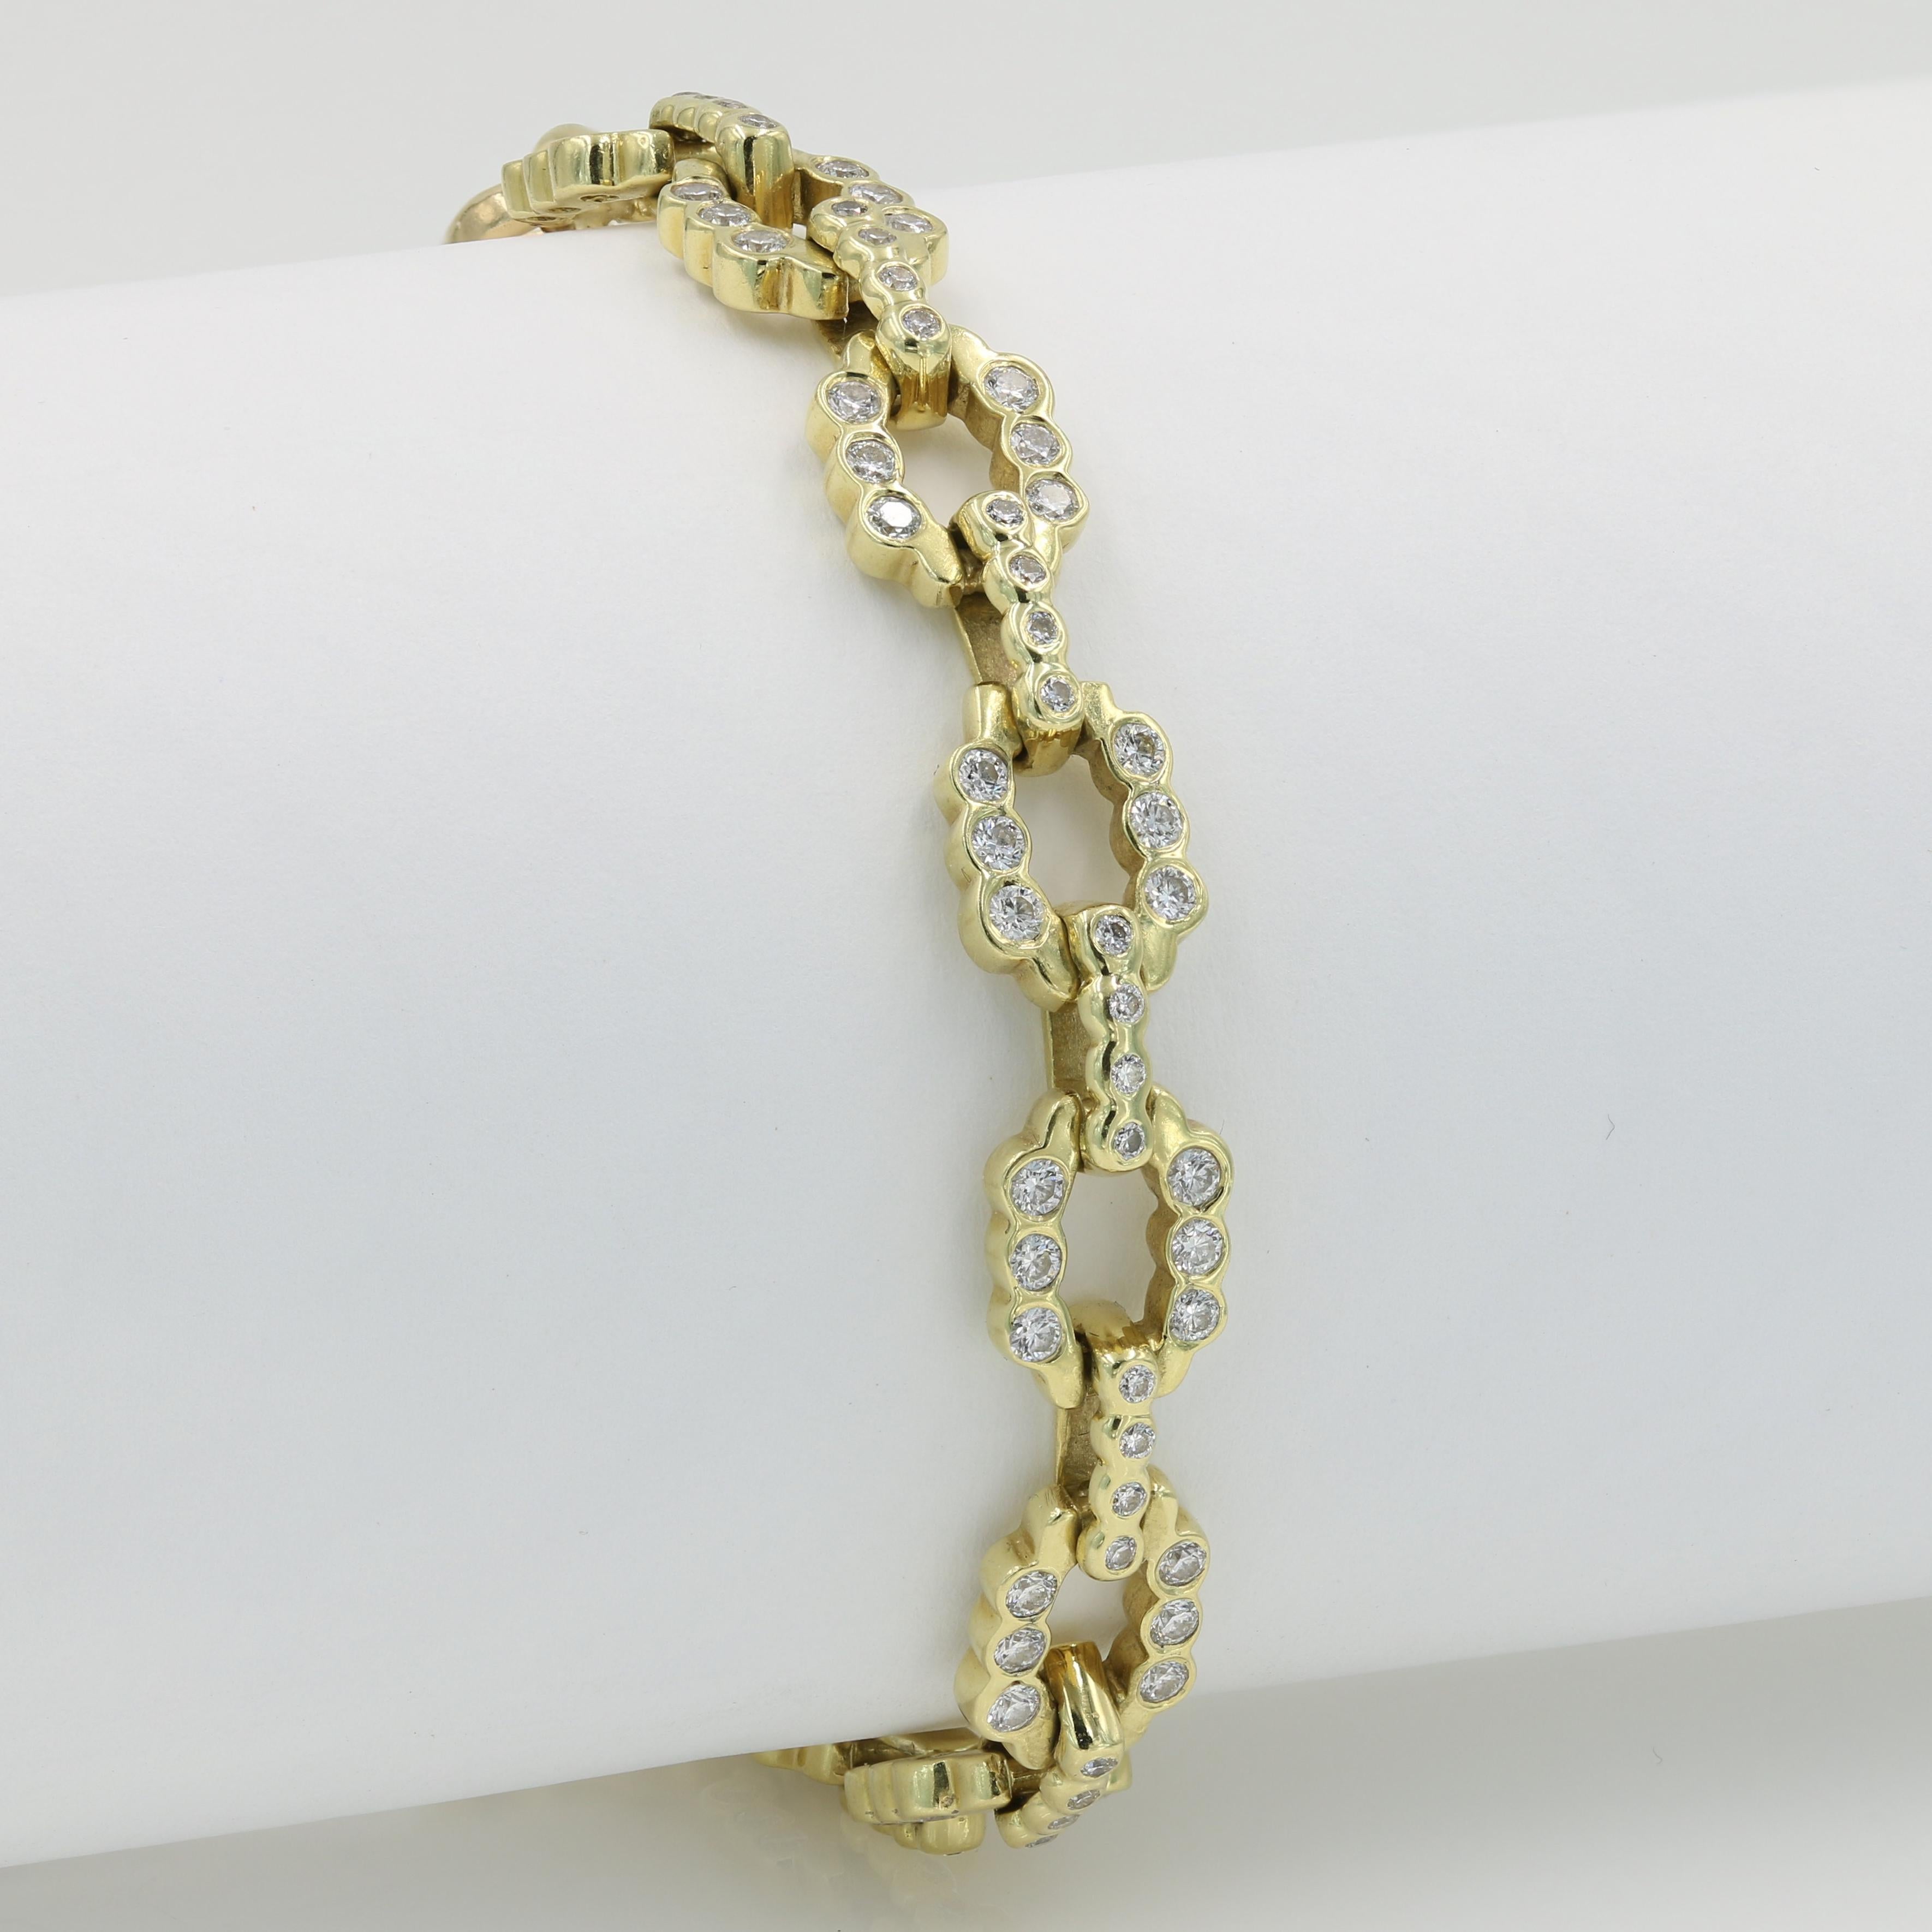 Lester Lampert Designed Diamond Link Bracelet in 18kt Yellow Gold - Containing 116 Ideal cut diamonds, weighing 2.47cts. total G/VS Bracelet measures 7